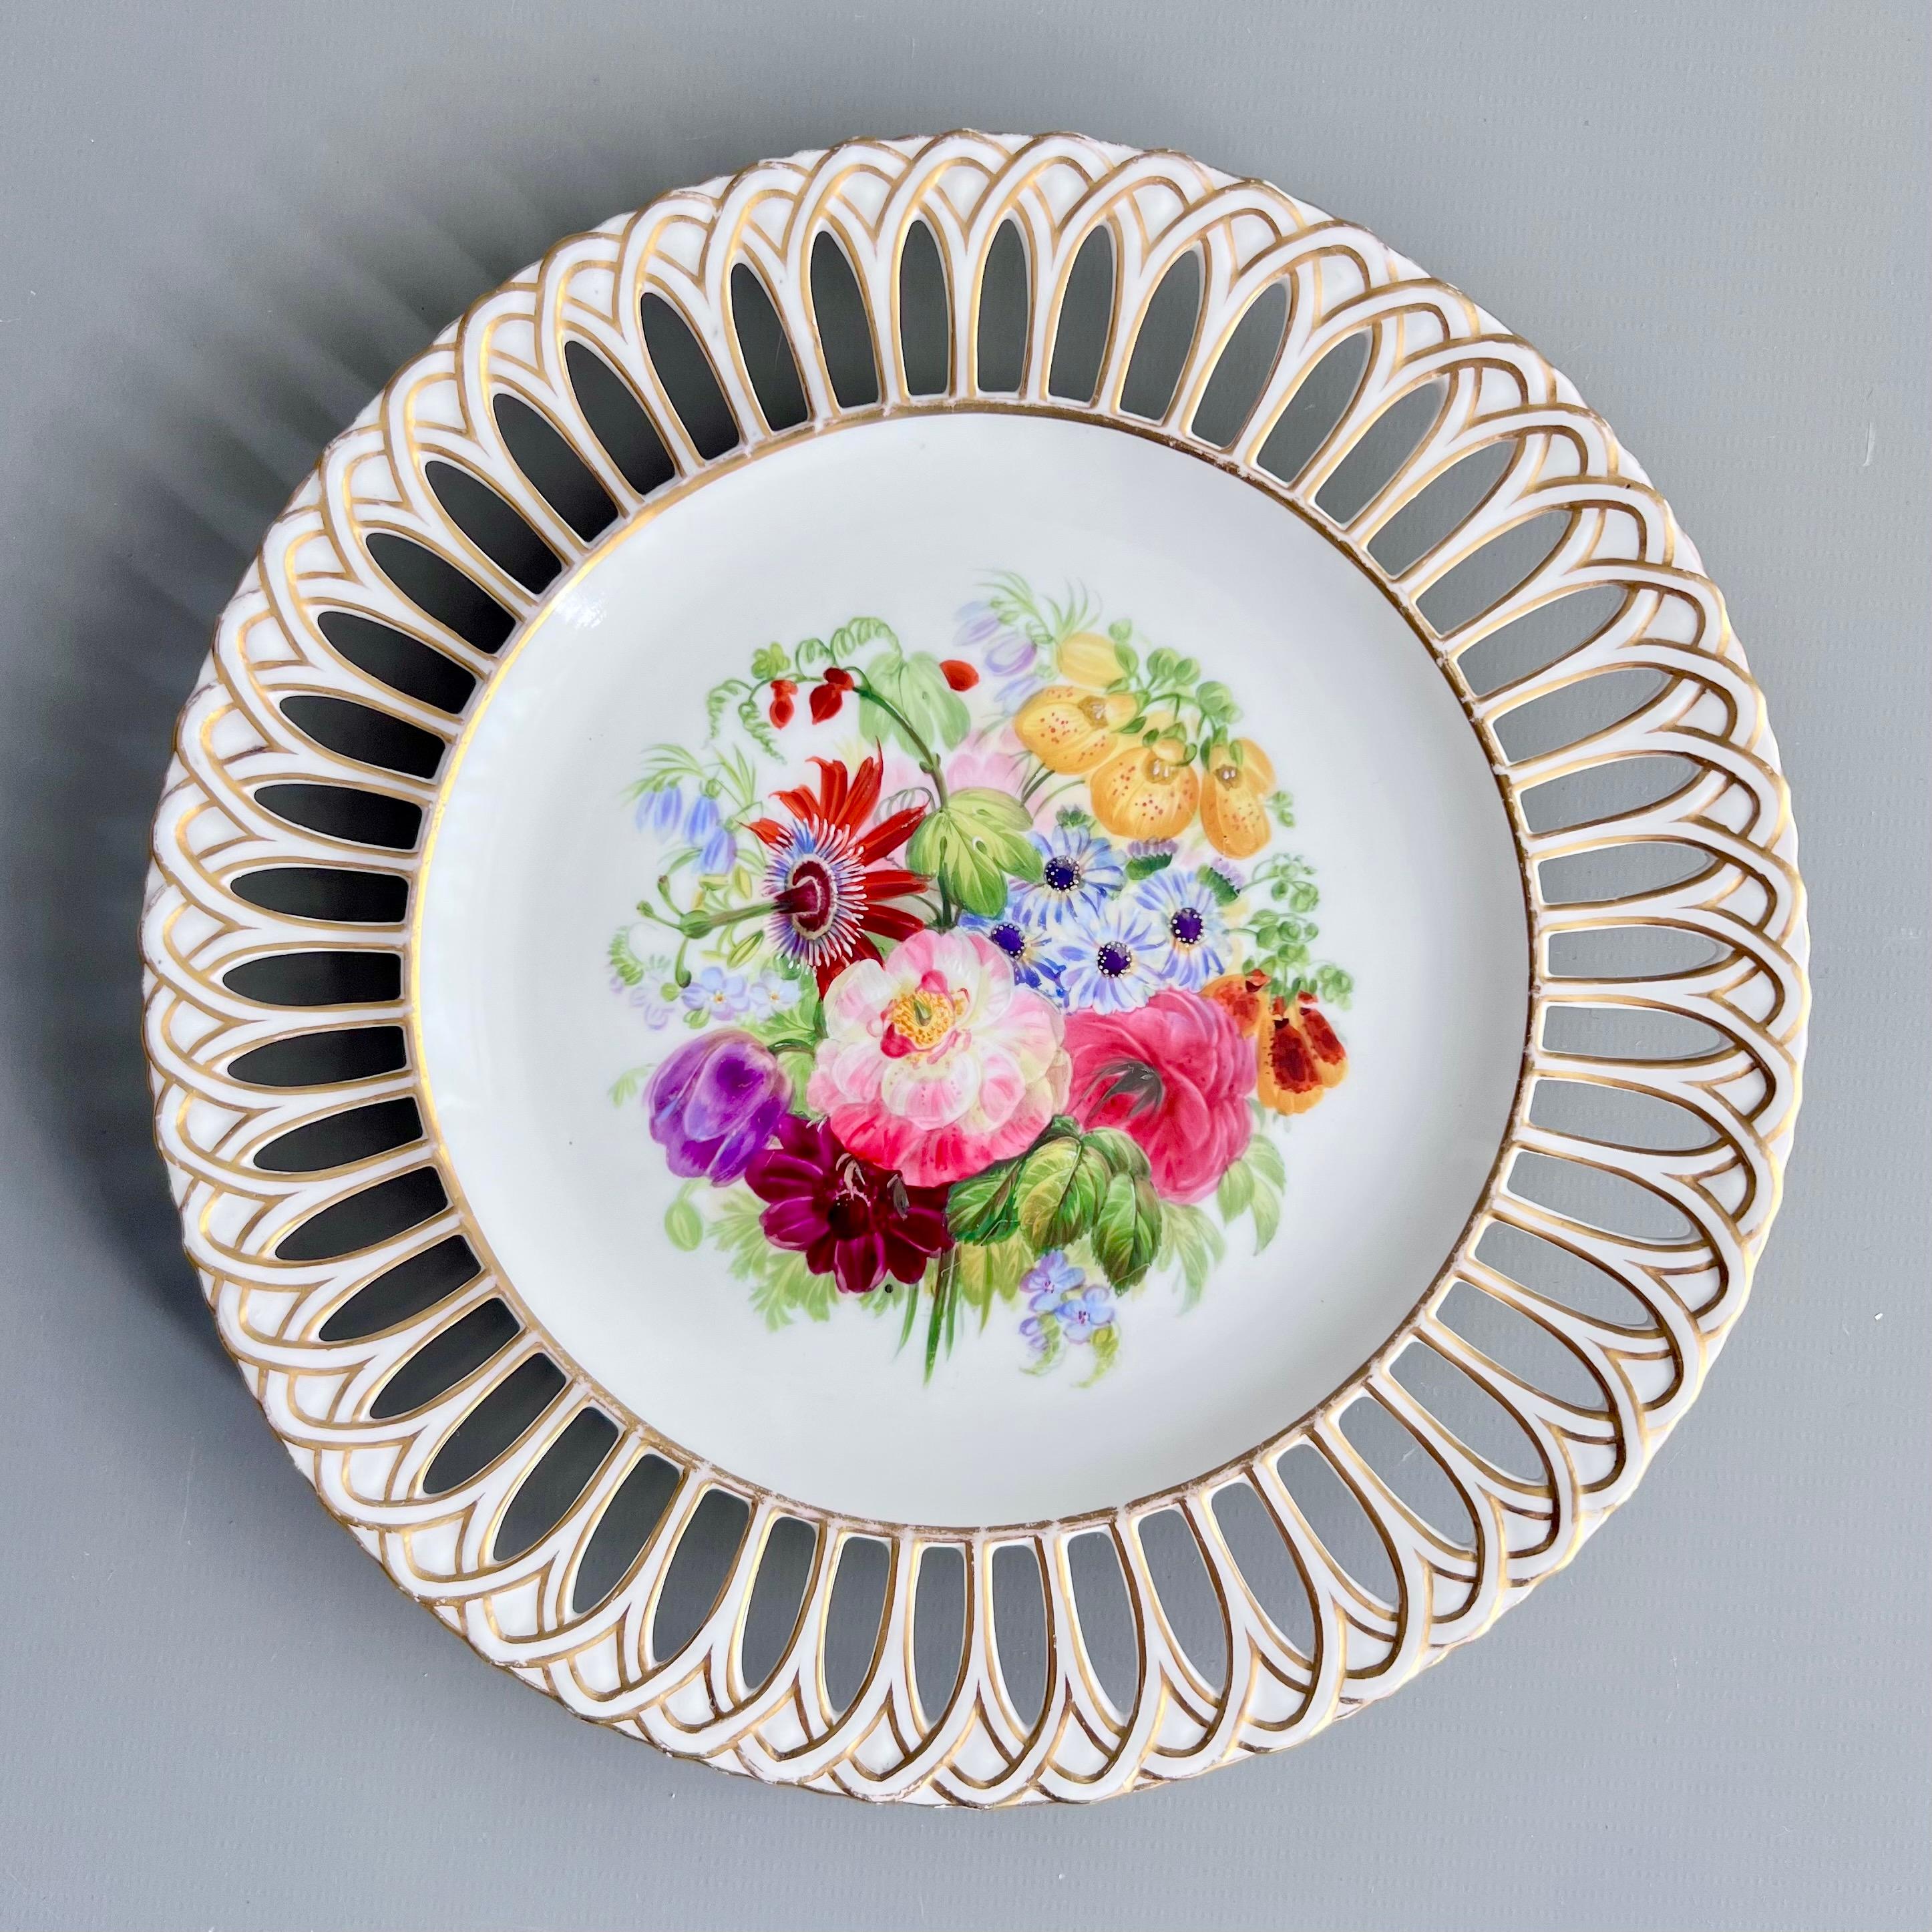 Set of 8 Plates by Copeland, Reticulated, Sublime Flowers by Greatbatch, 1848 For Sale 2